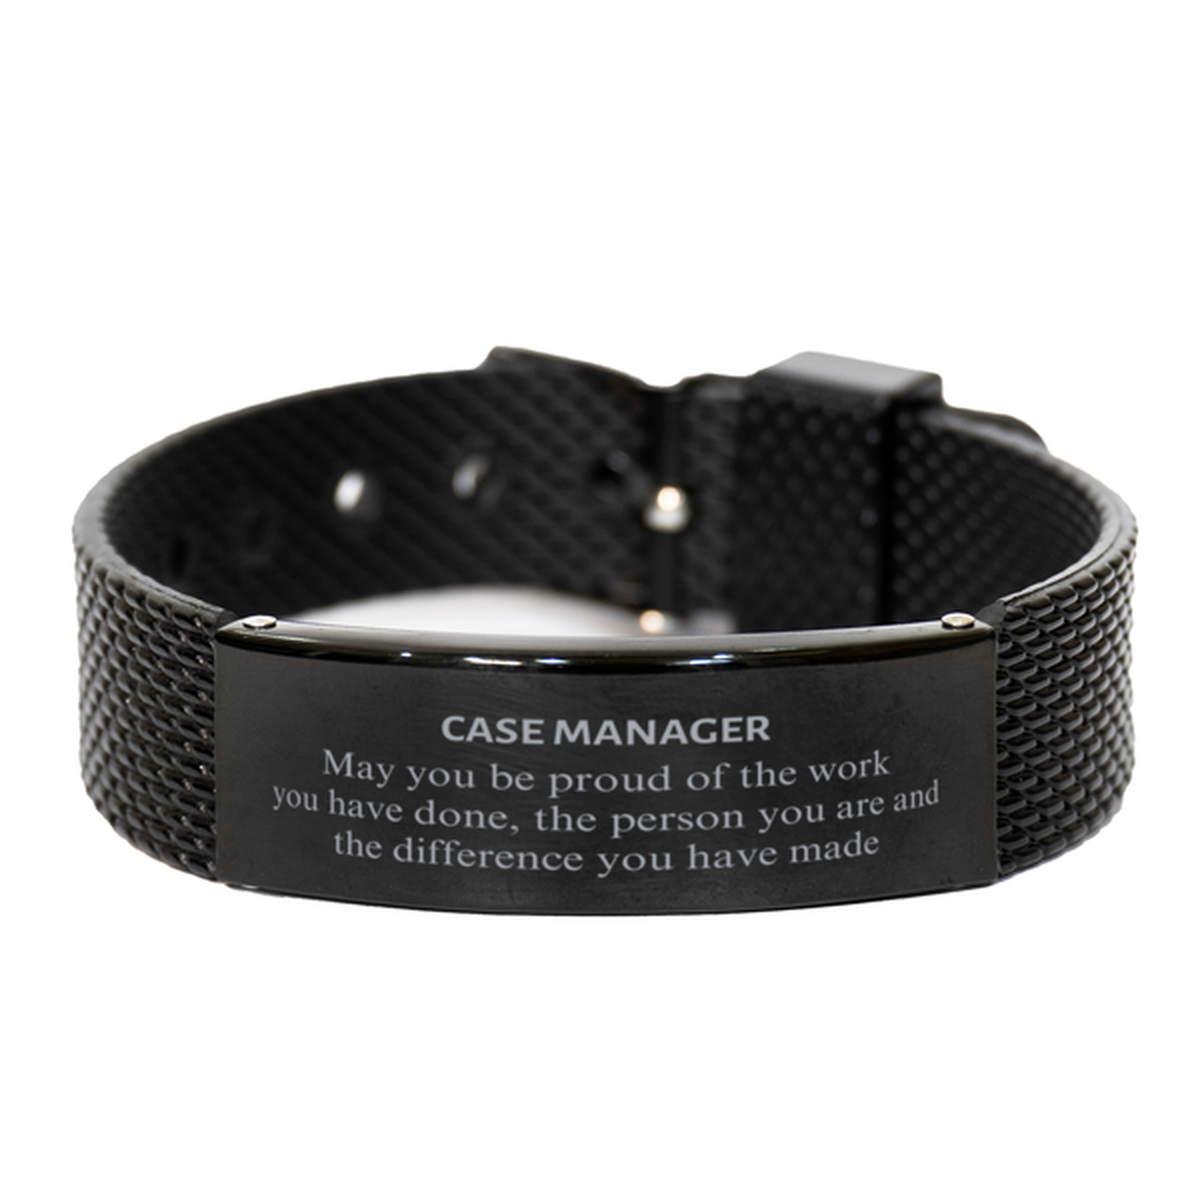 Case Manager May you be proud of the work you have done, Retirement Case Manager Black Shark Mesh Bracelet for Colleague Appreciation Gifts Amazing for Case Manager